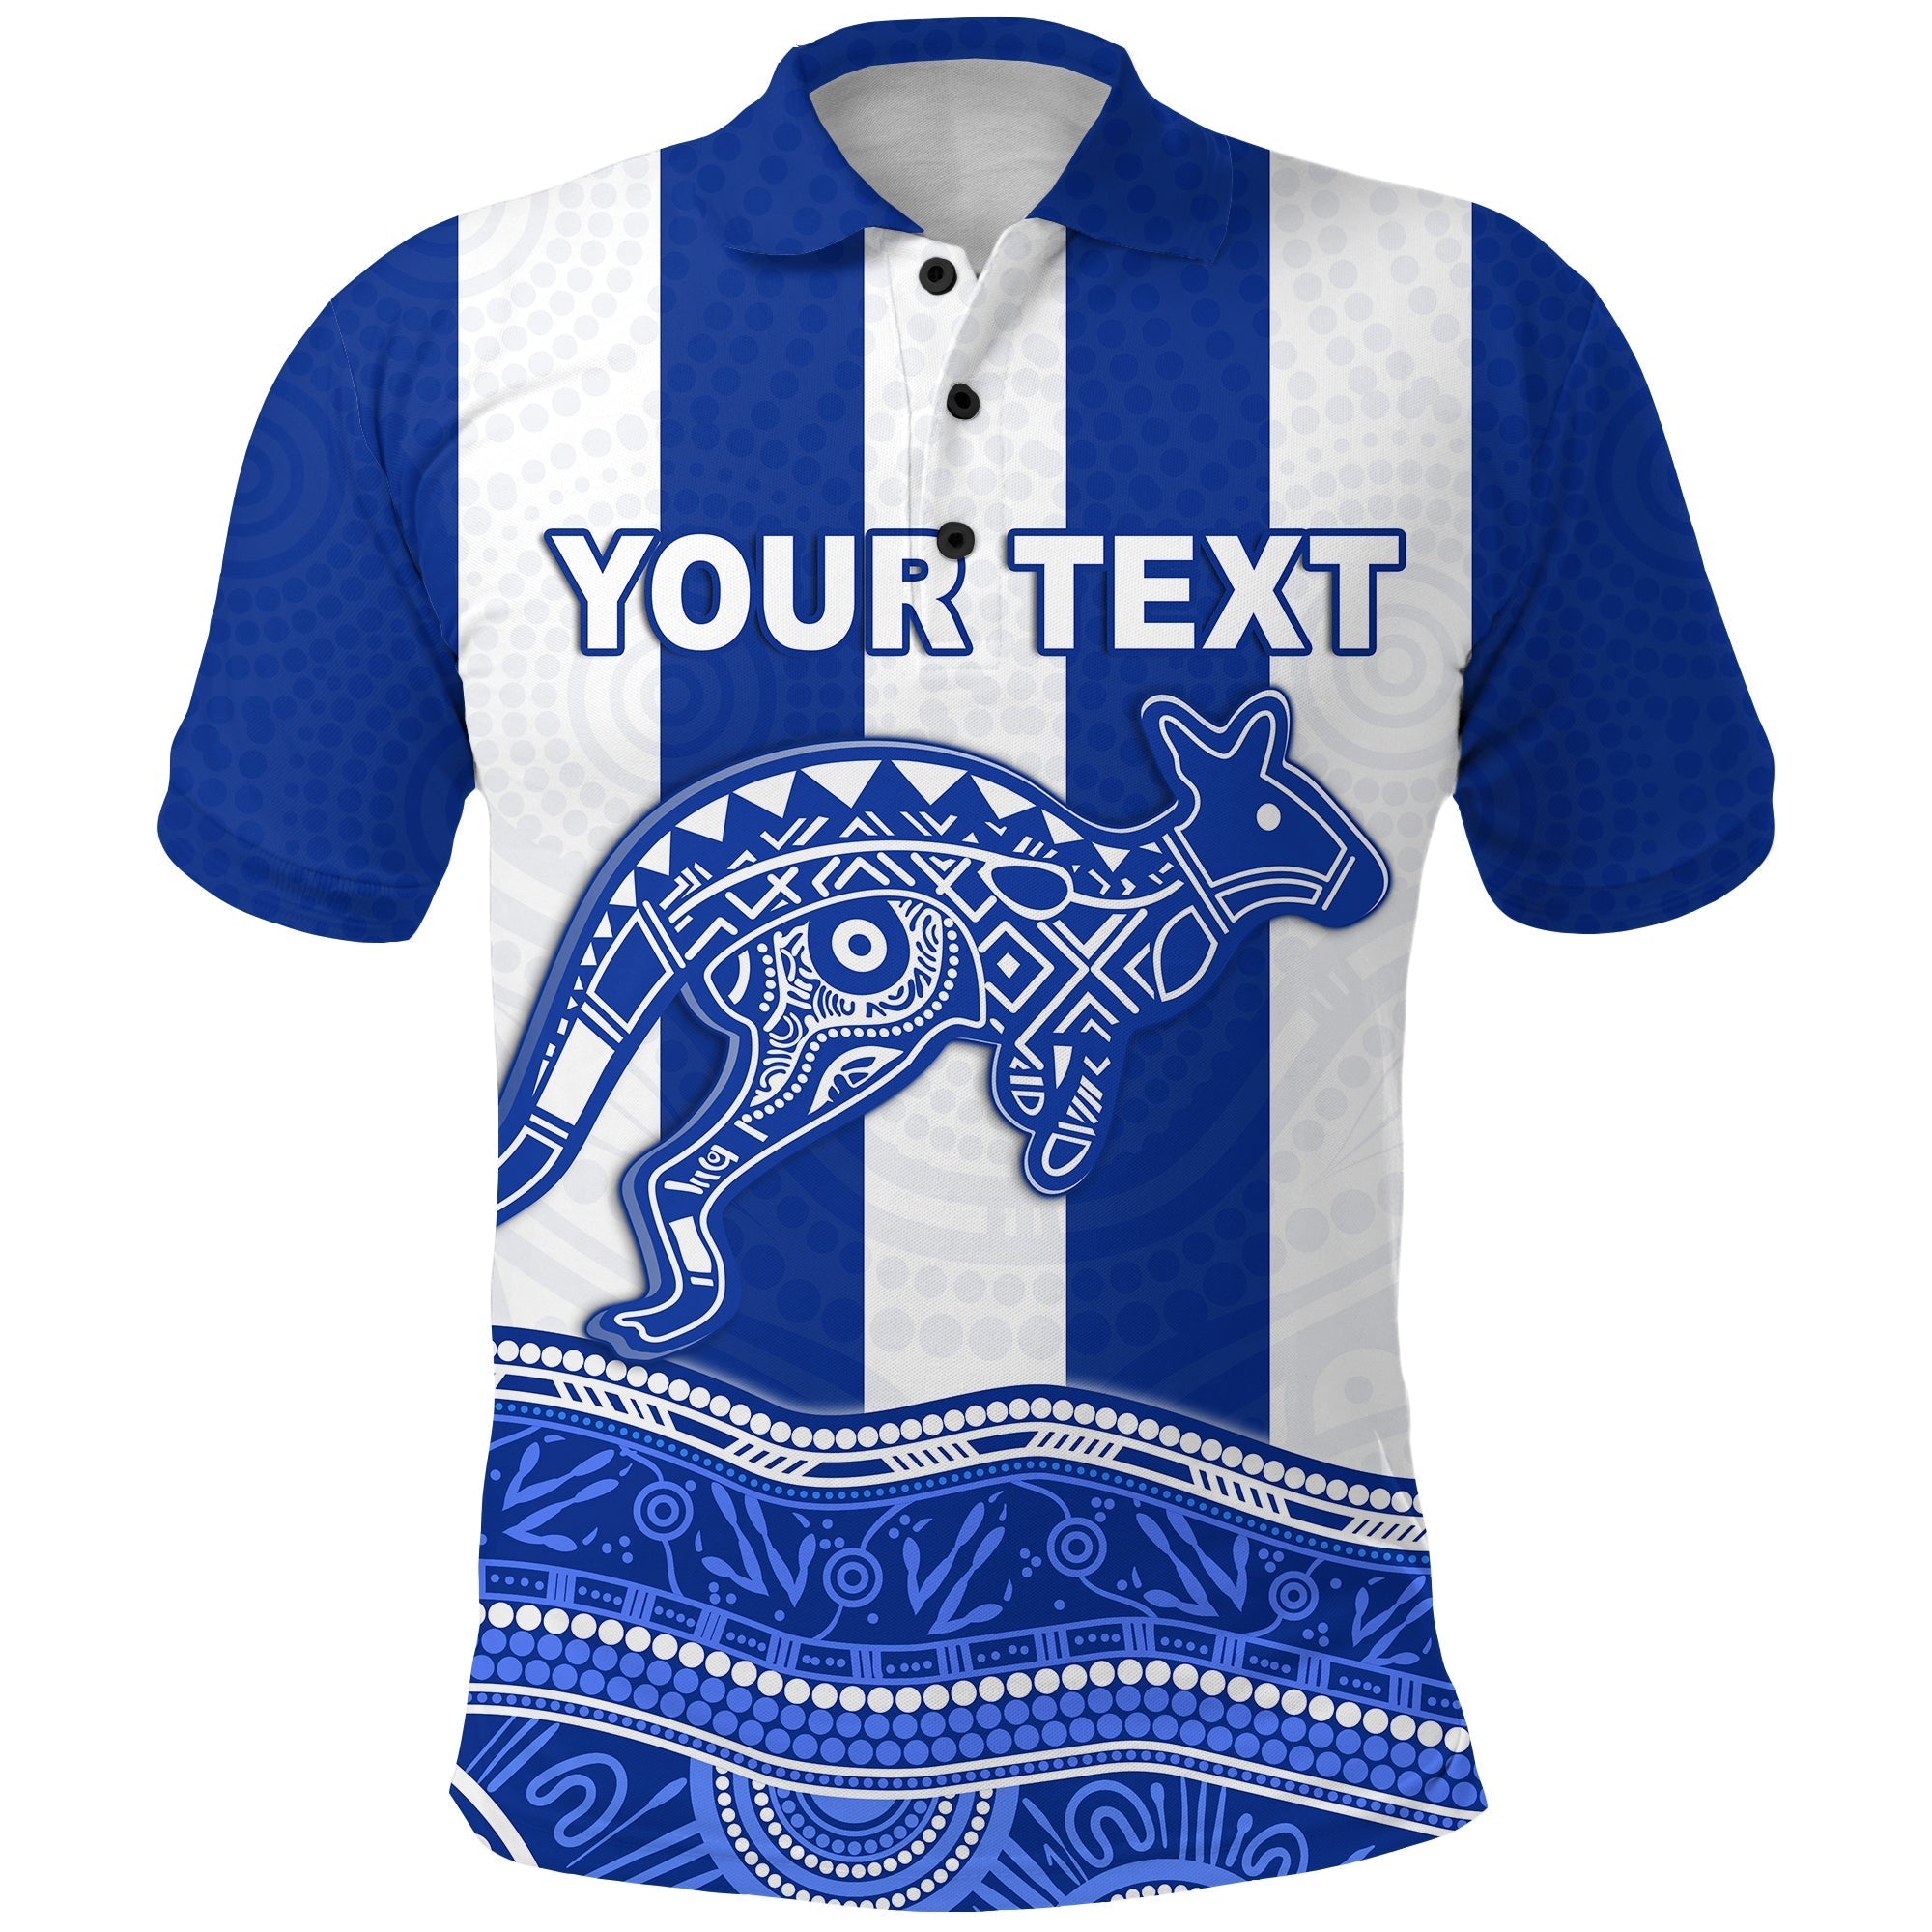 custom-personalised-roos-indigenous-polo-shirt-north-melbourne-football-lt13